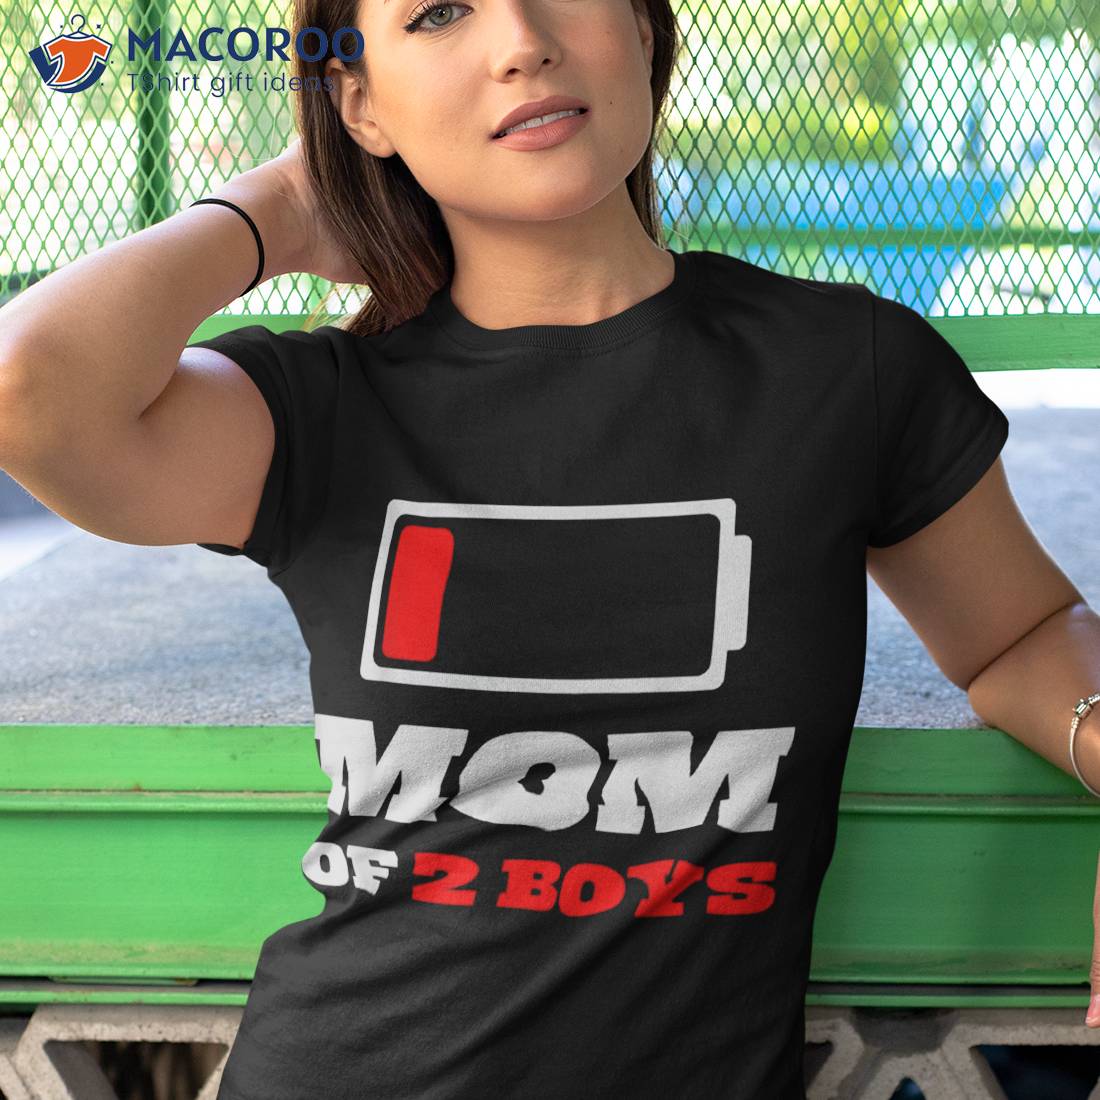 https://images.macoroo.com/wp-content/uploads/2023/05/funny-gift-ideas-for-mother-s-day-mom-of-2-boys-shirt-tshirt-1.jpg